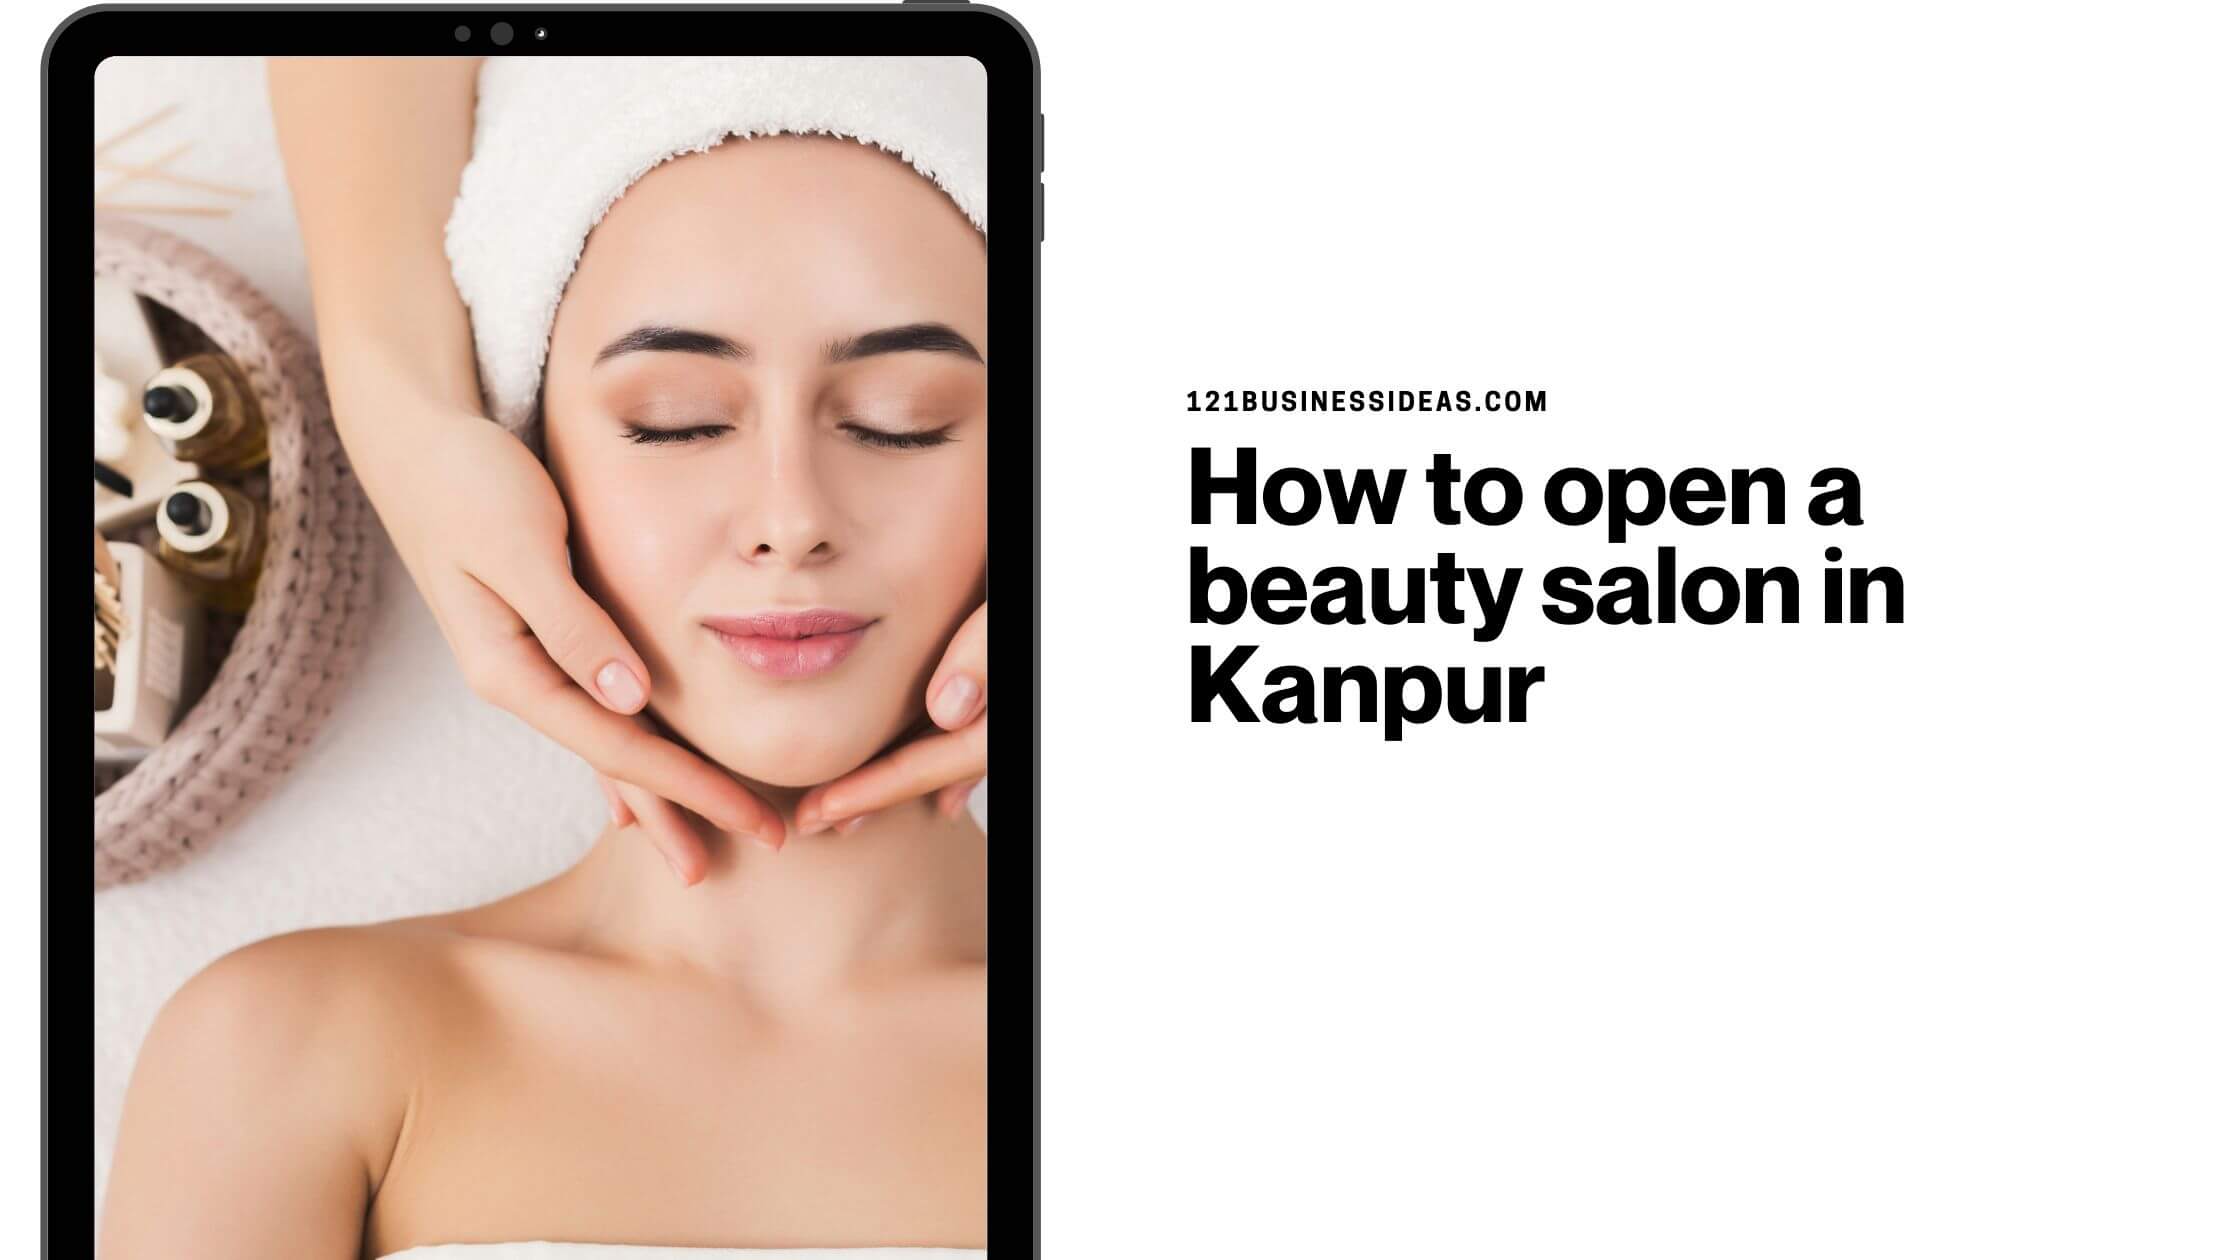 How to open a beauty salon in Kanpur (1)